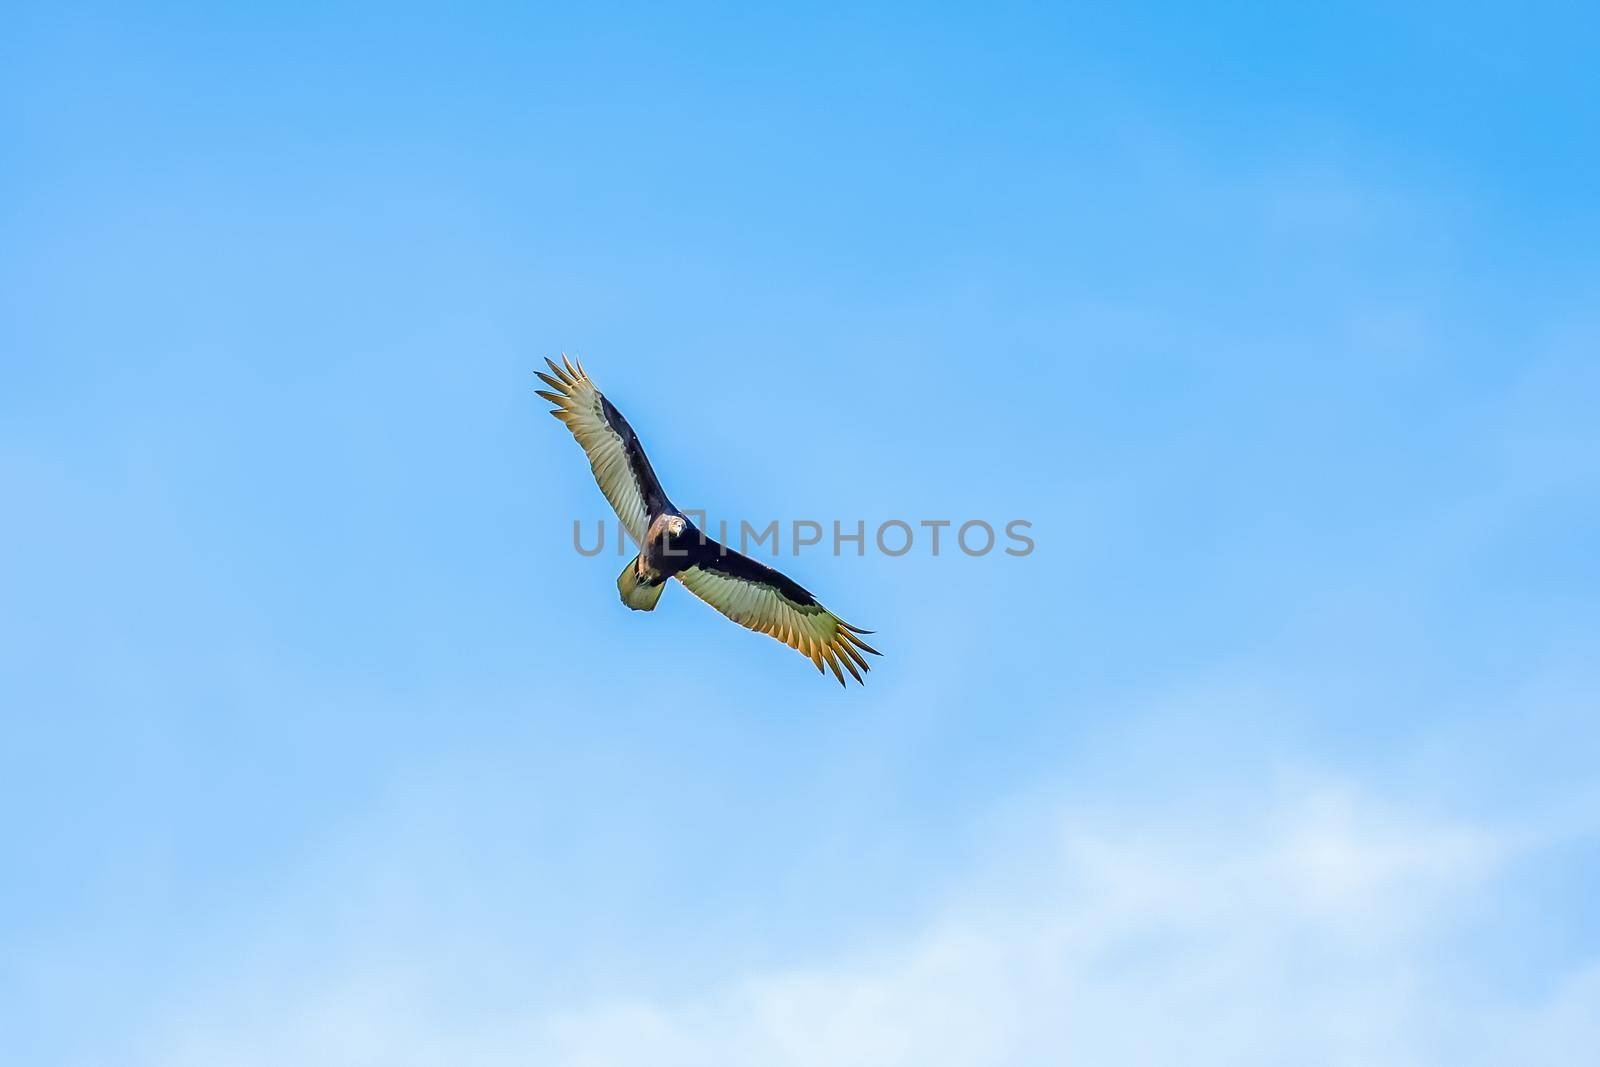 in the blue sky, an eagle soars with its wings spread wide at the height of the clouds